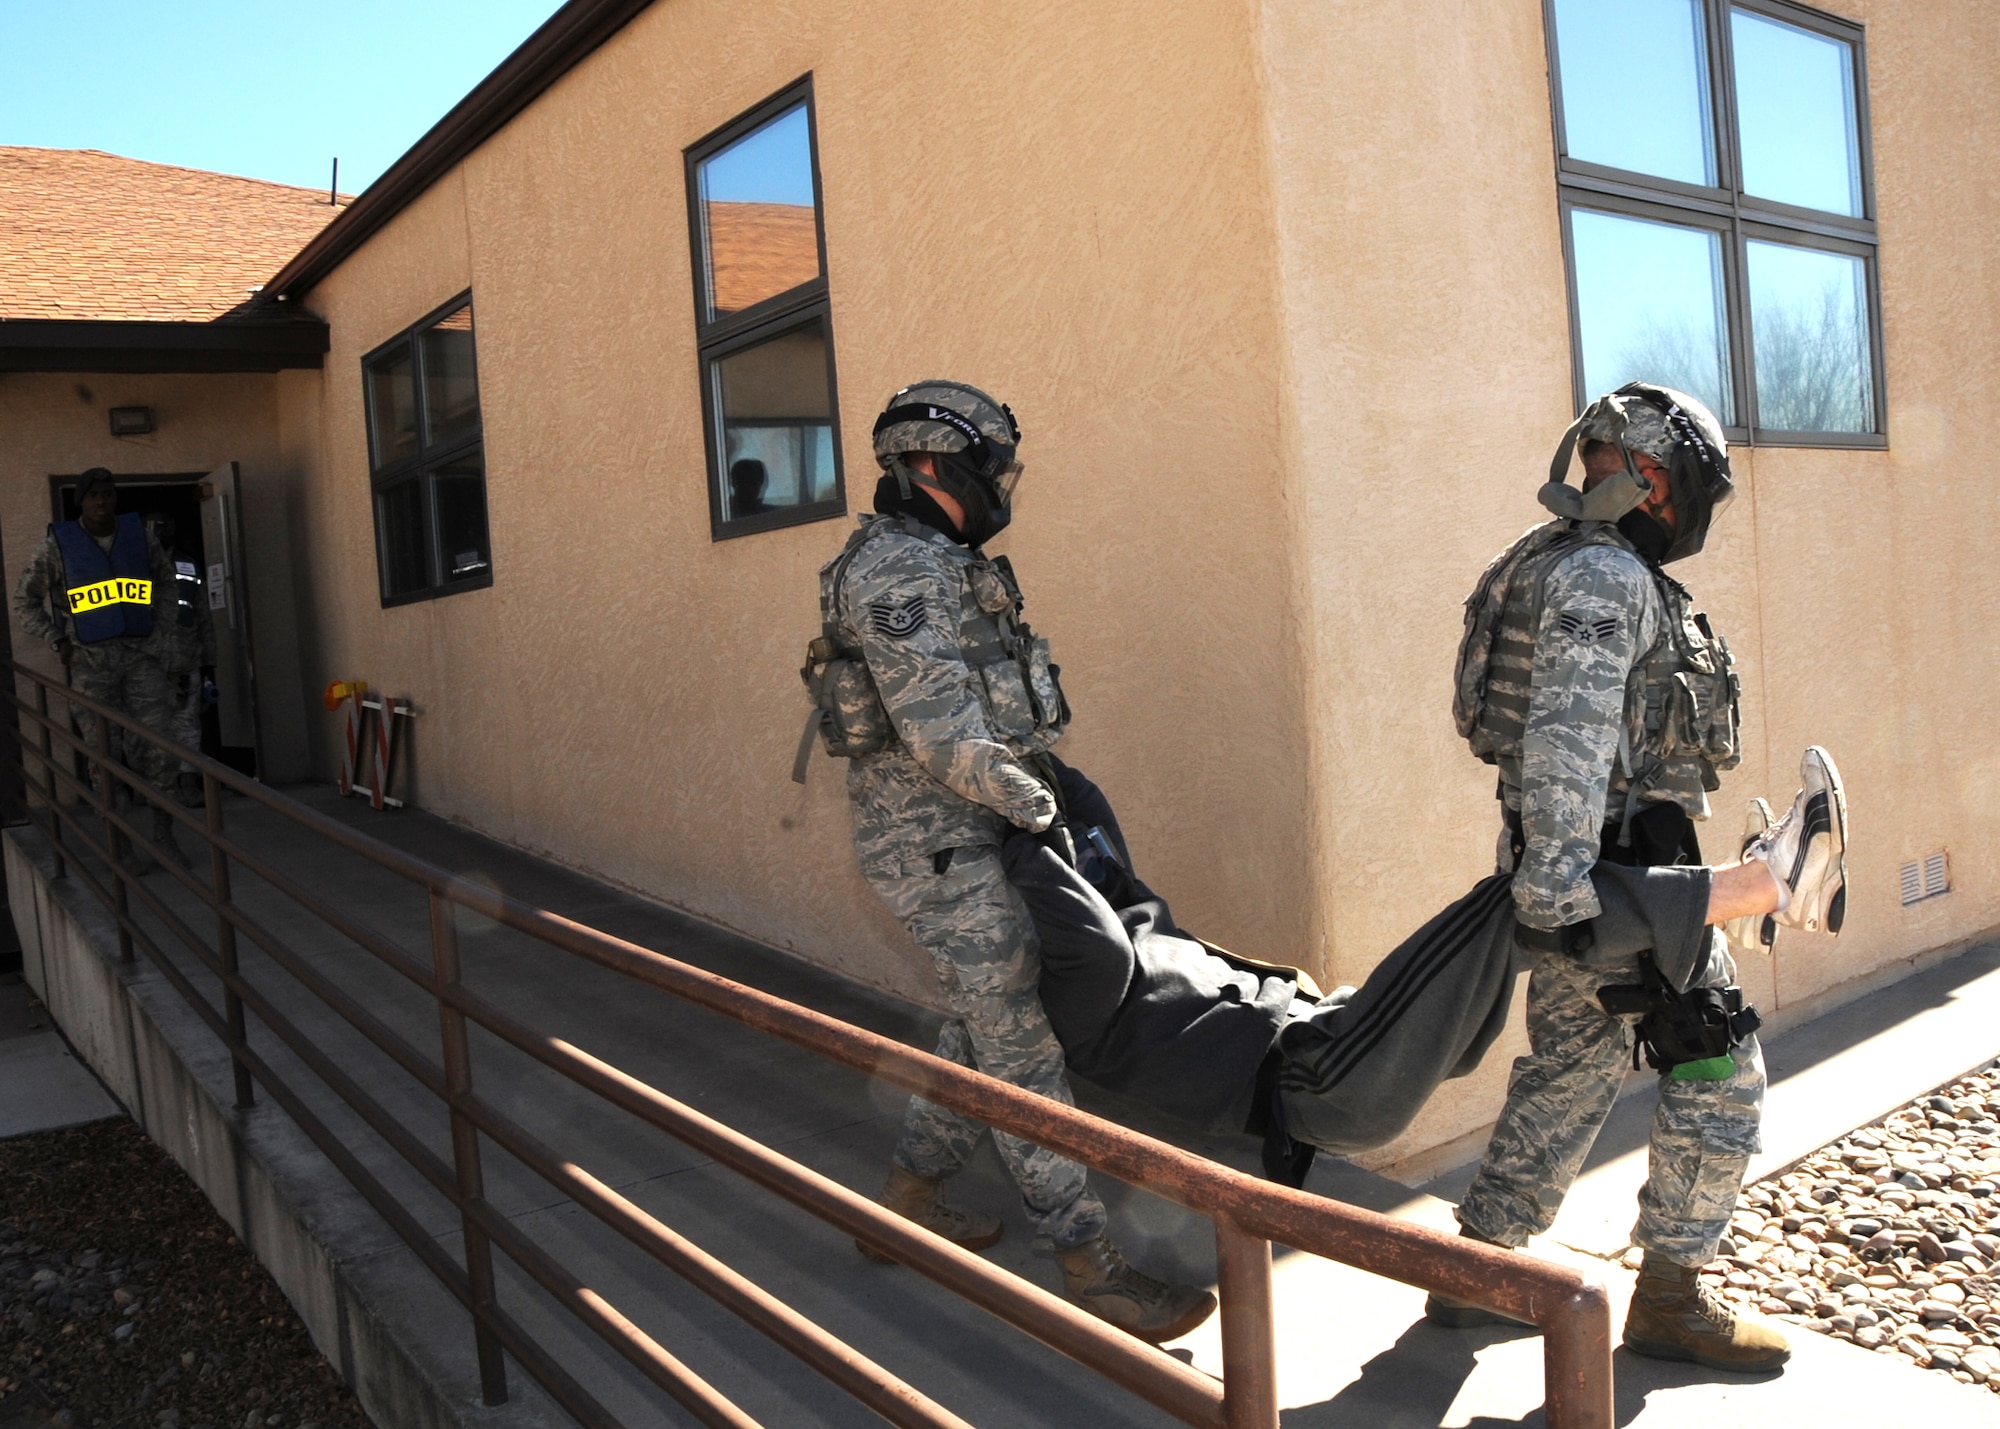 Two Airmen from Security Forces carry out a “shooter” during an active-shooter scenario Jan. 28. Other scenarios that took place during the operational readiness exercise were chalk deployment, a suspicious-package response and a fire in family housing.  U.S. Air Force Photo by Dennis Carlson.